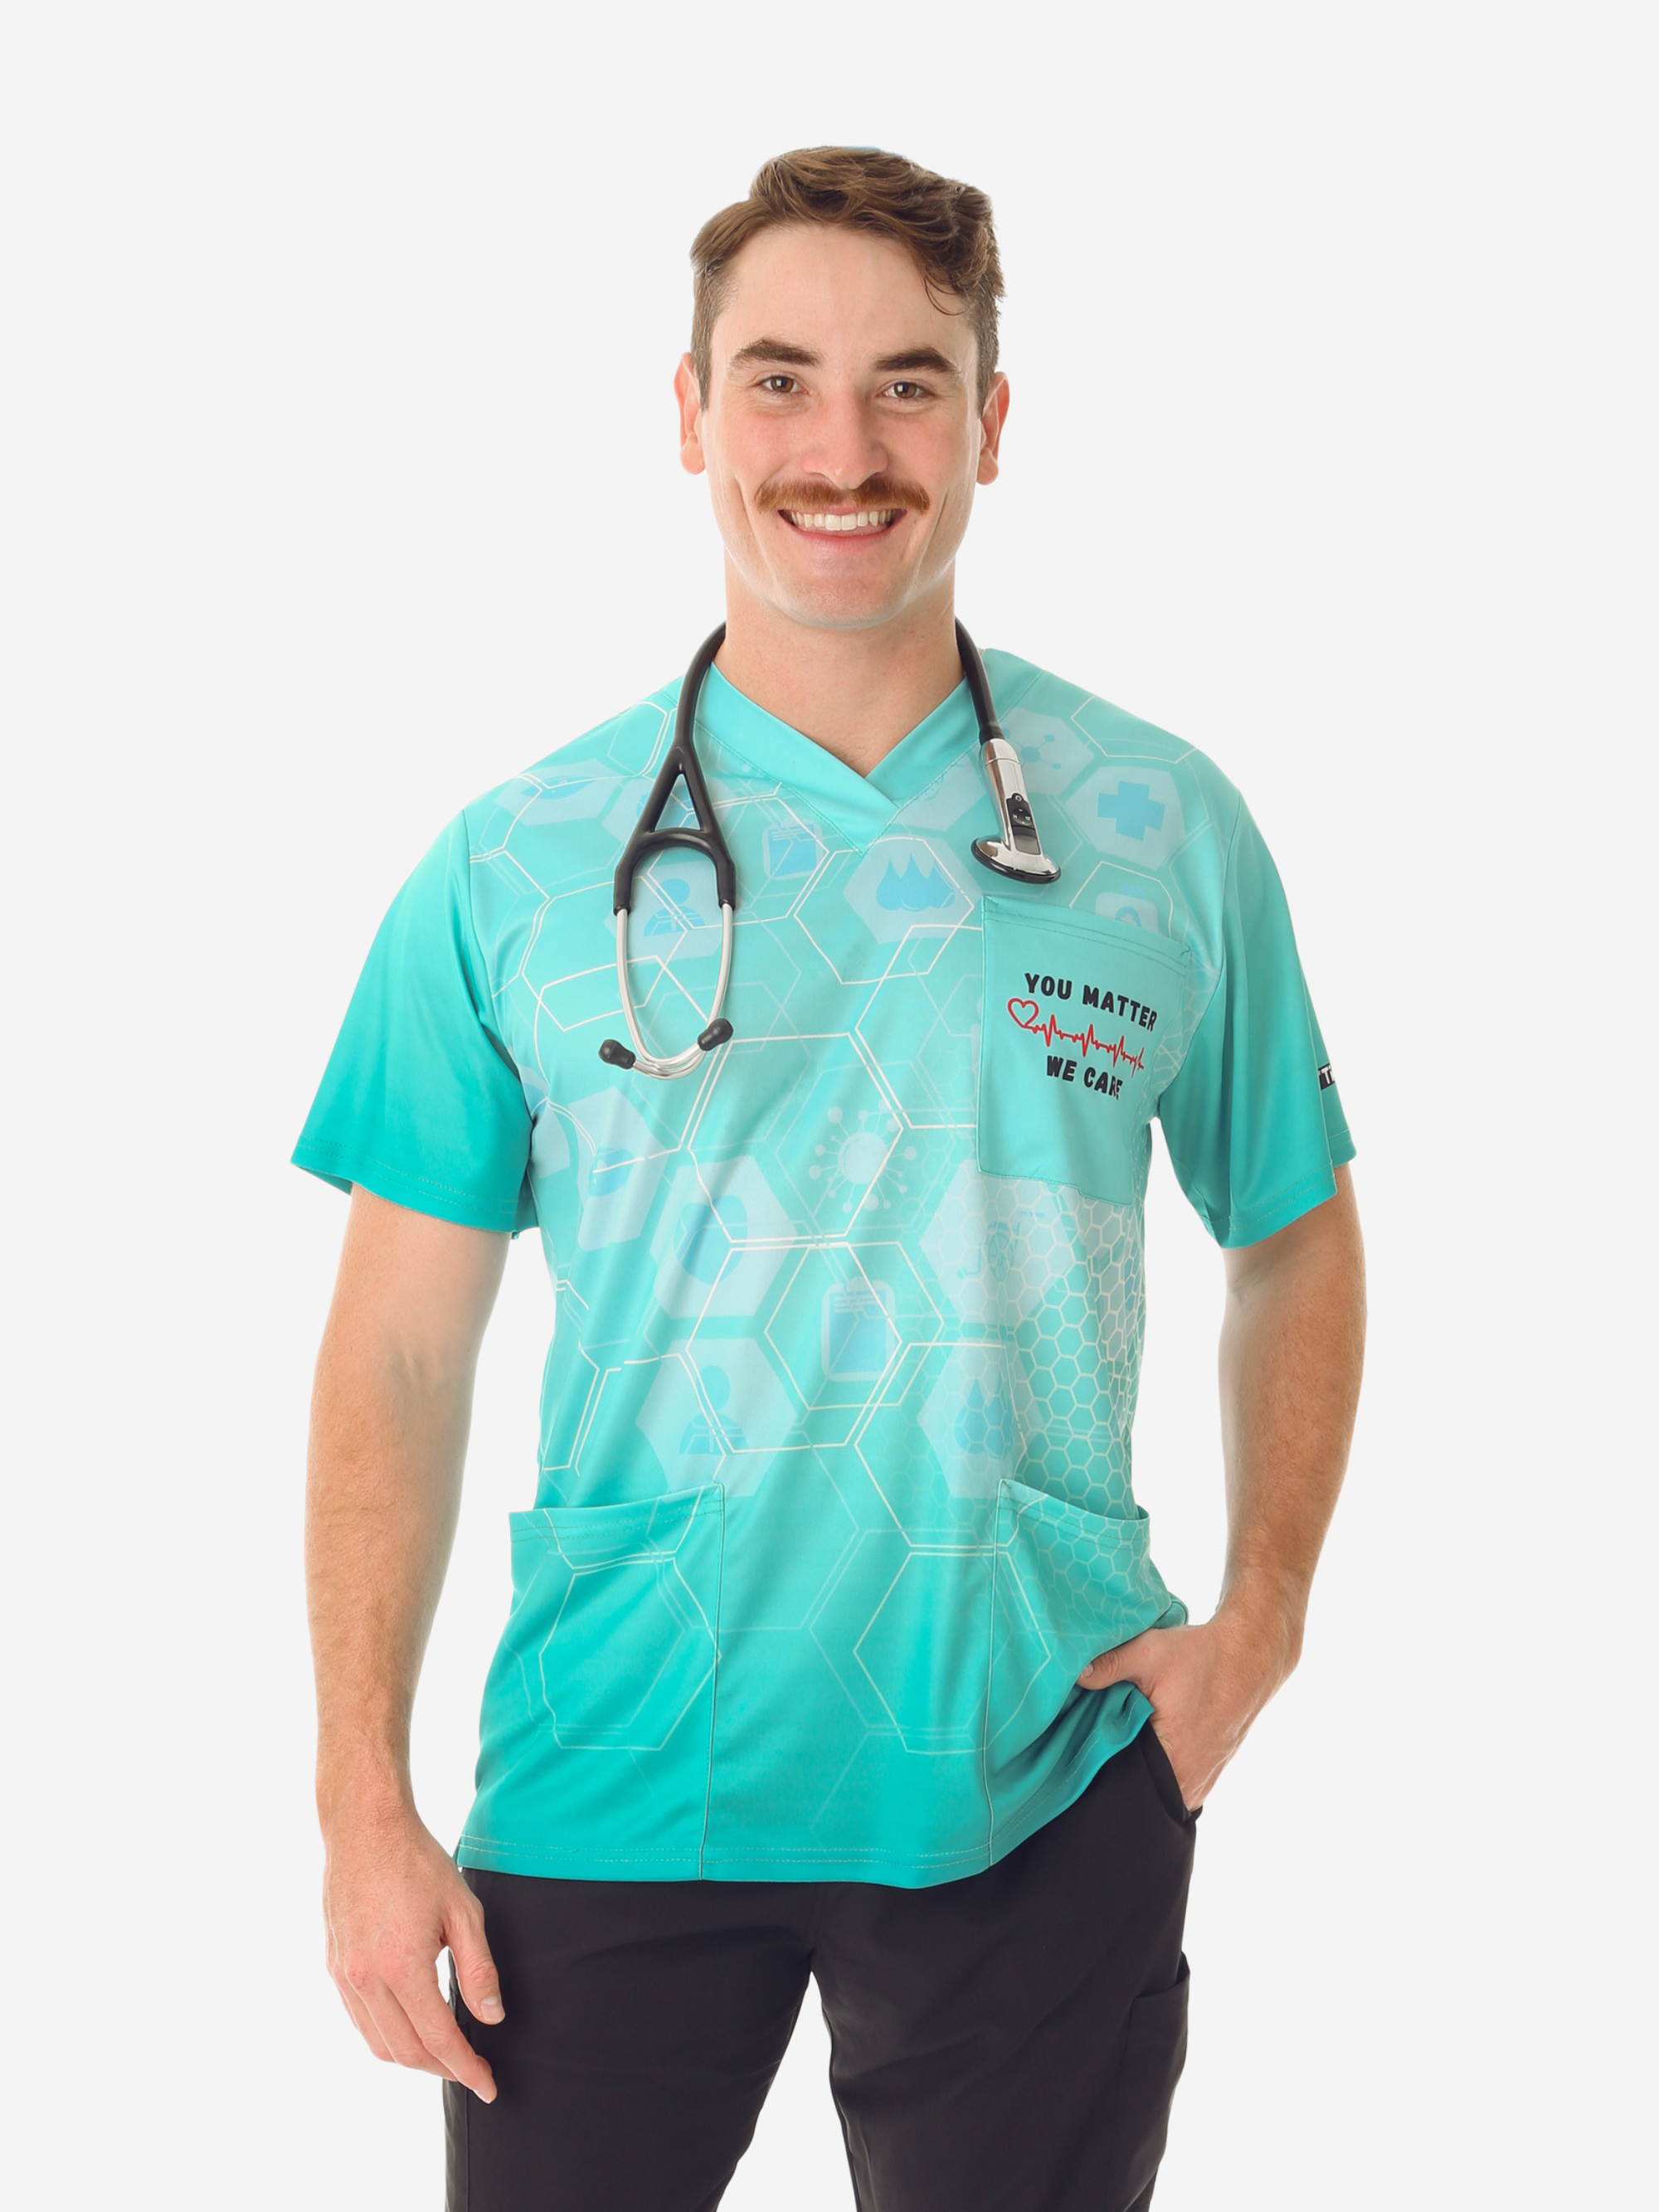 Men's The University of Kansas Health System Scrub Top Design Contest Winner You Matter We Care Top Only Front View